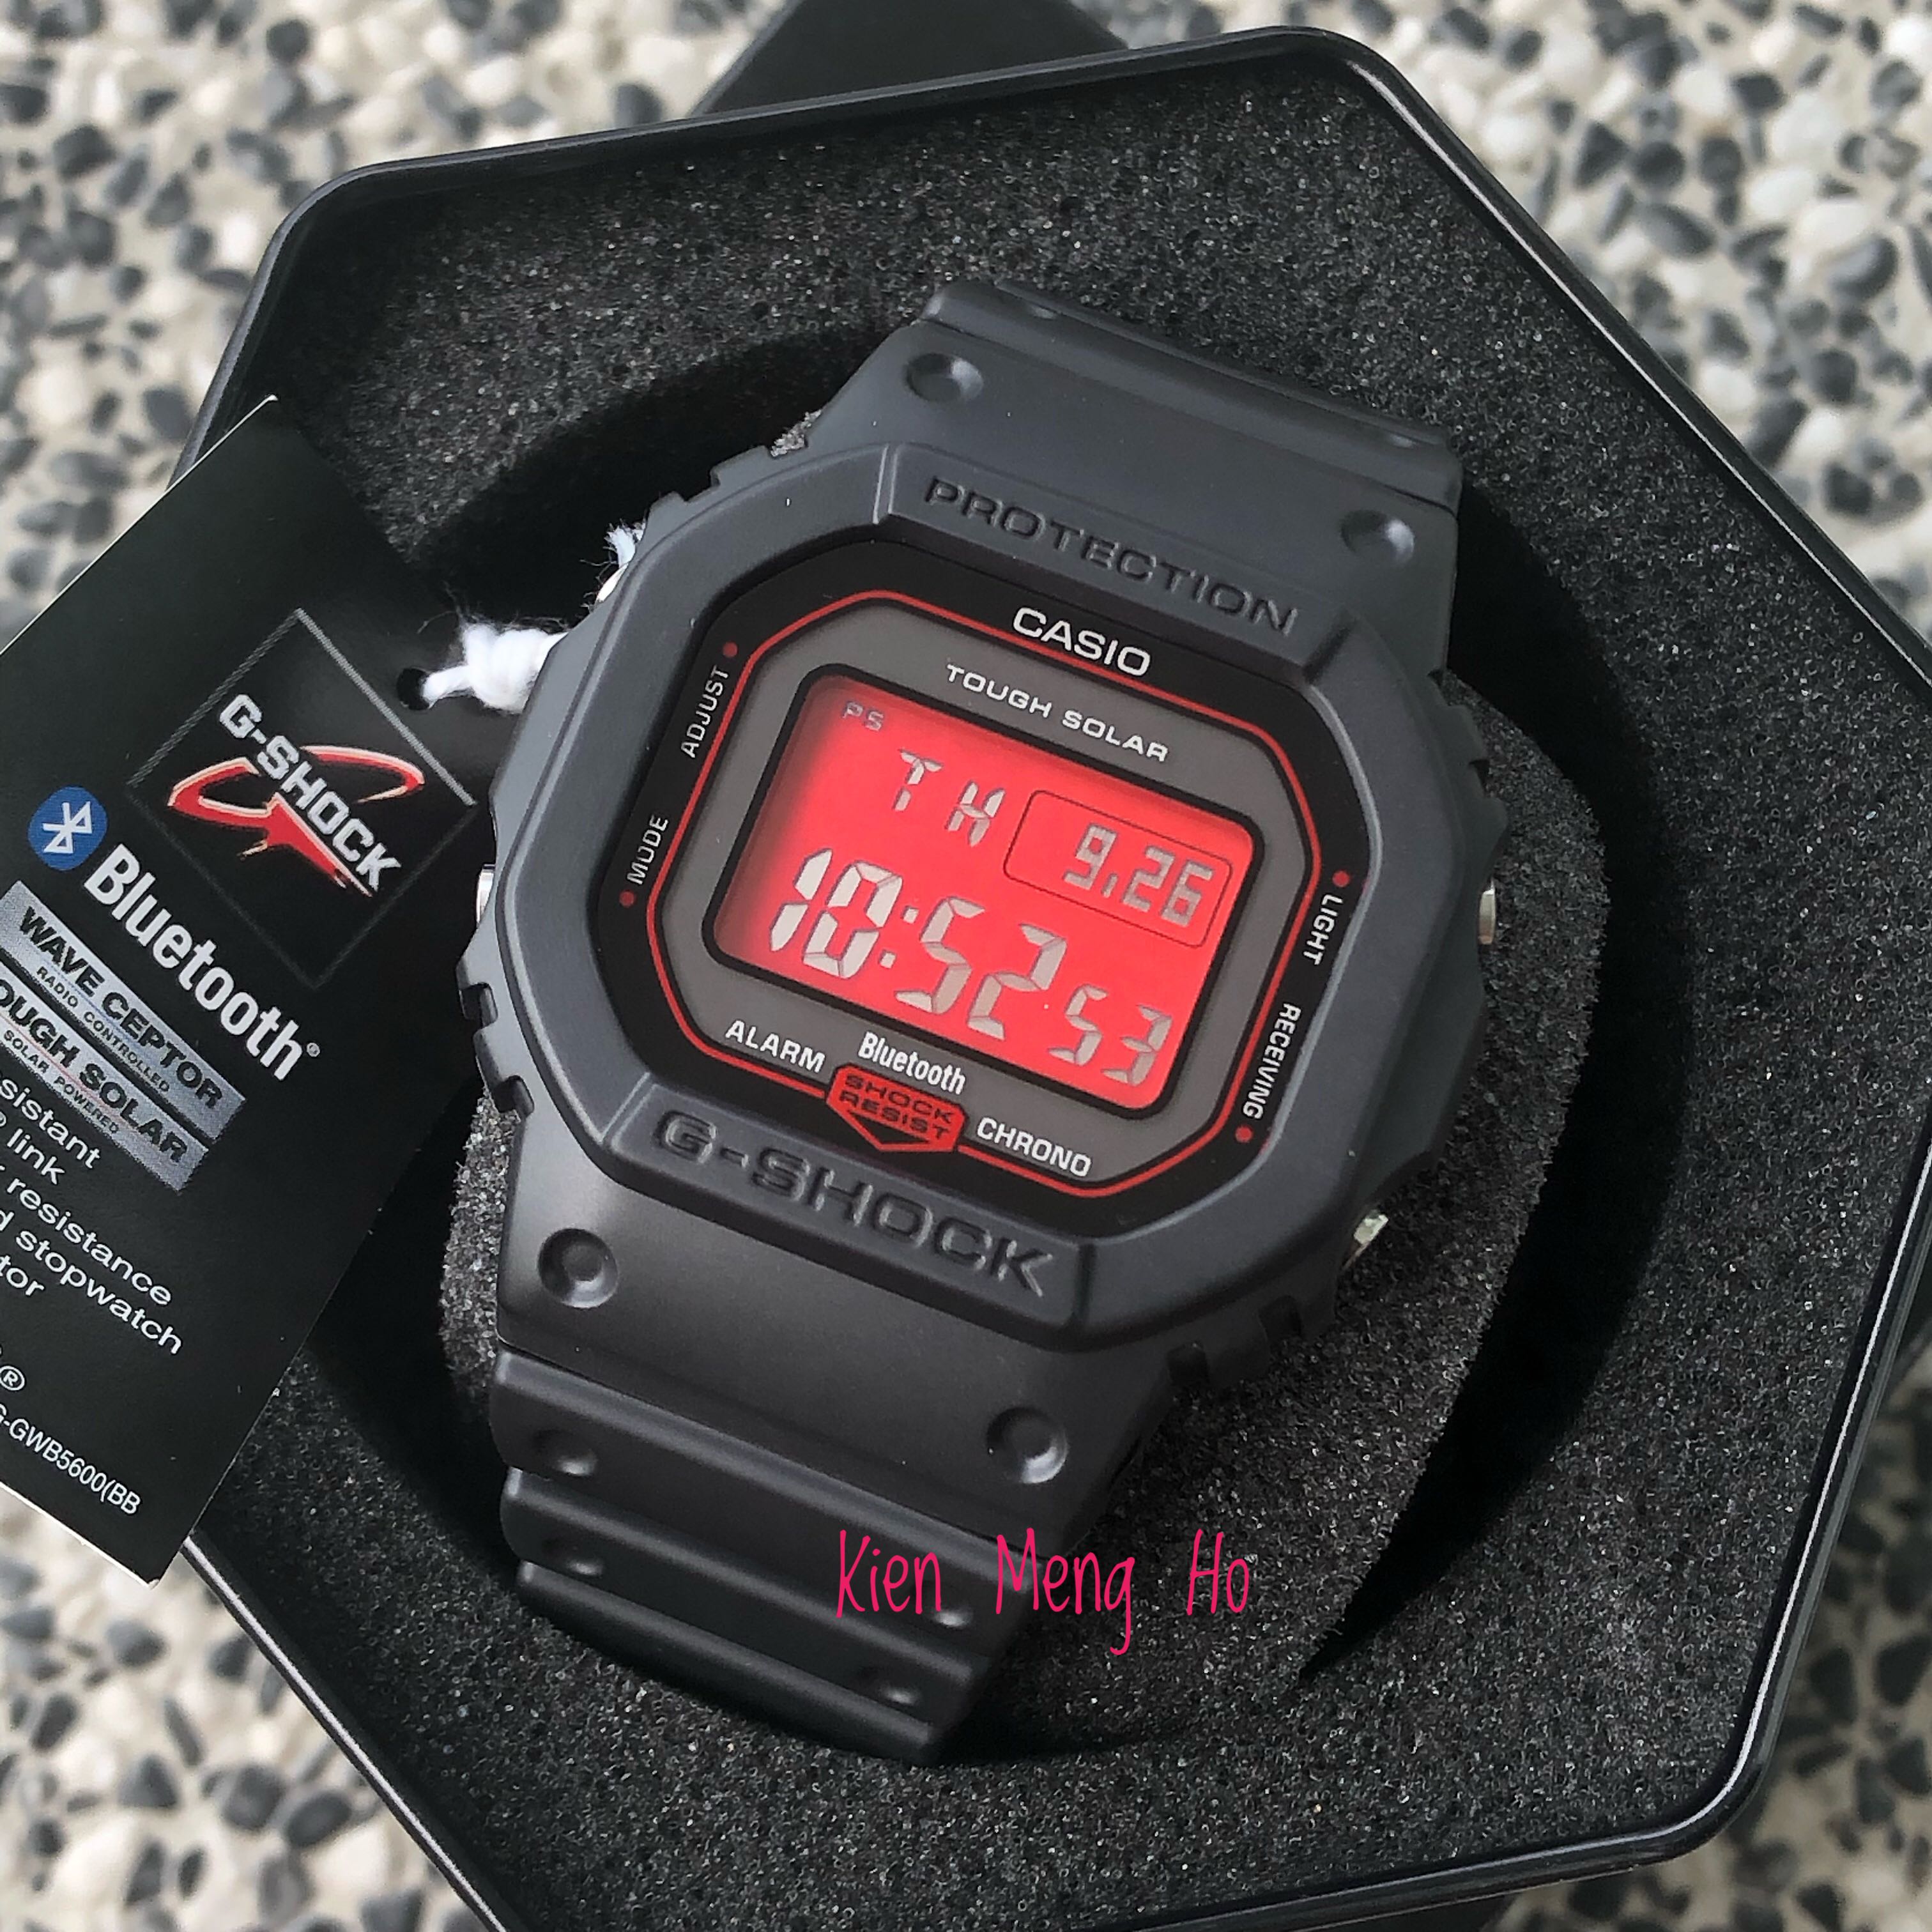 Promo Free Tampered Glass Screen Protector Casio G Shock Gw B5600ar 1 Special Colour Adrenalin Red Series Black Square With Red Led Bluetooth Tough Solar And Multiband 6 Unisex